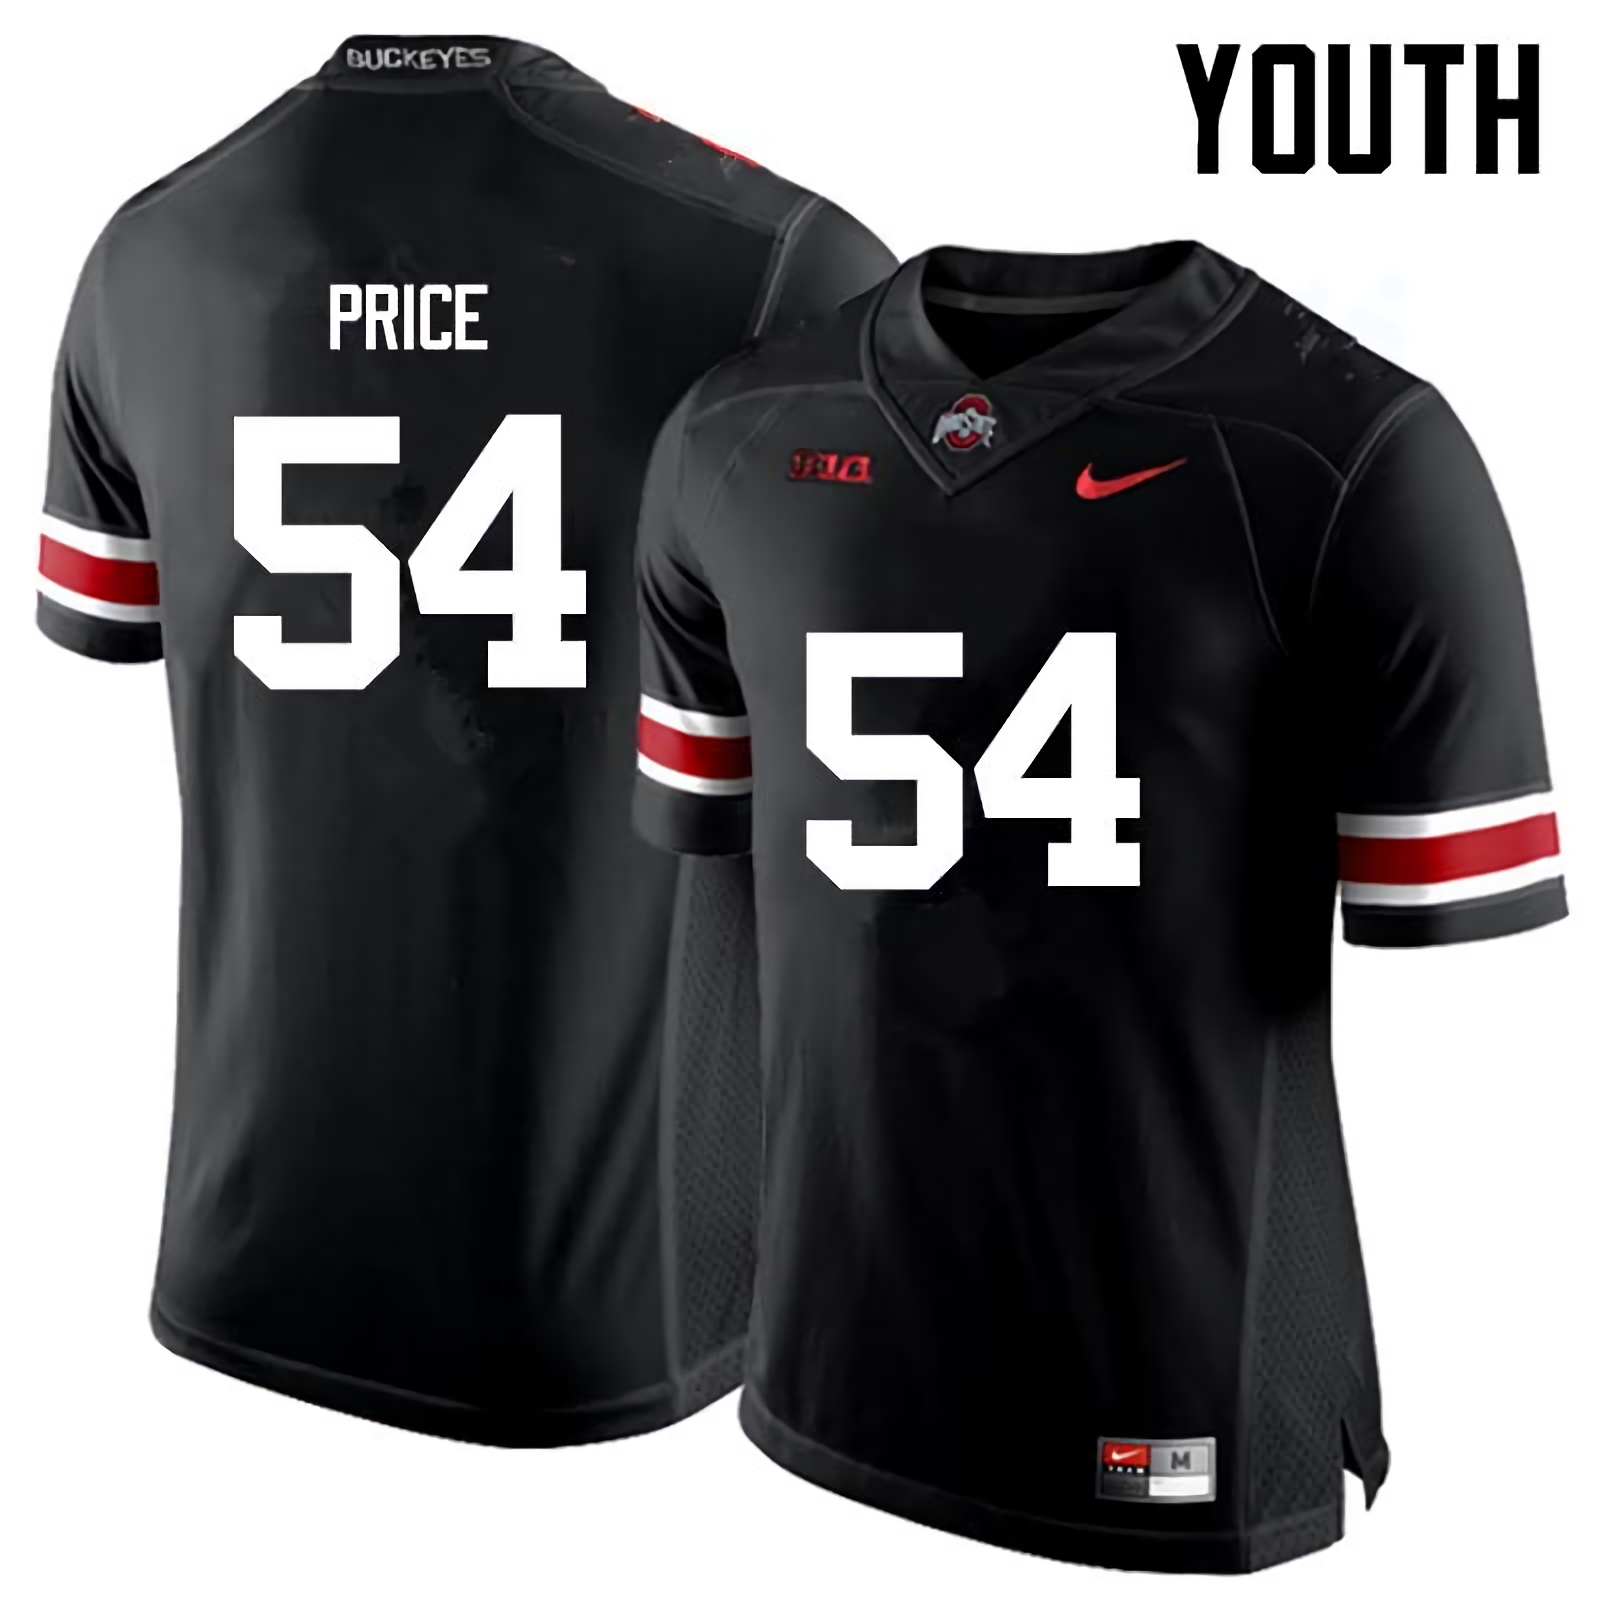 Billy Price Ohio State Buckeyes Youth NCAA #54 Nike Black College Stitched Football Jersey AGG3856XQ